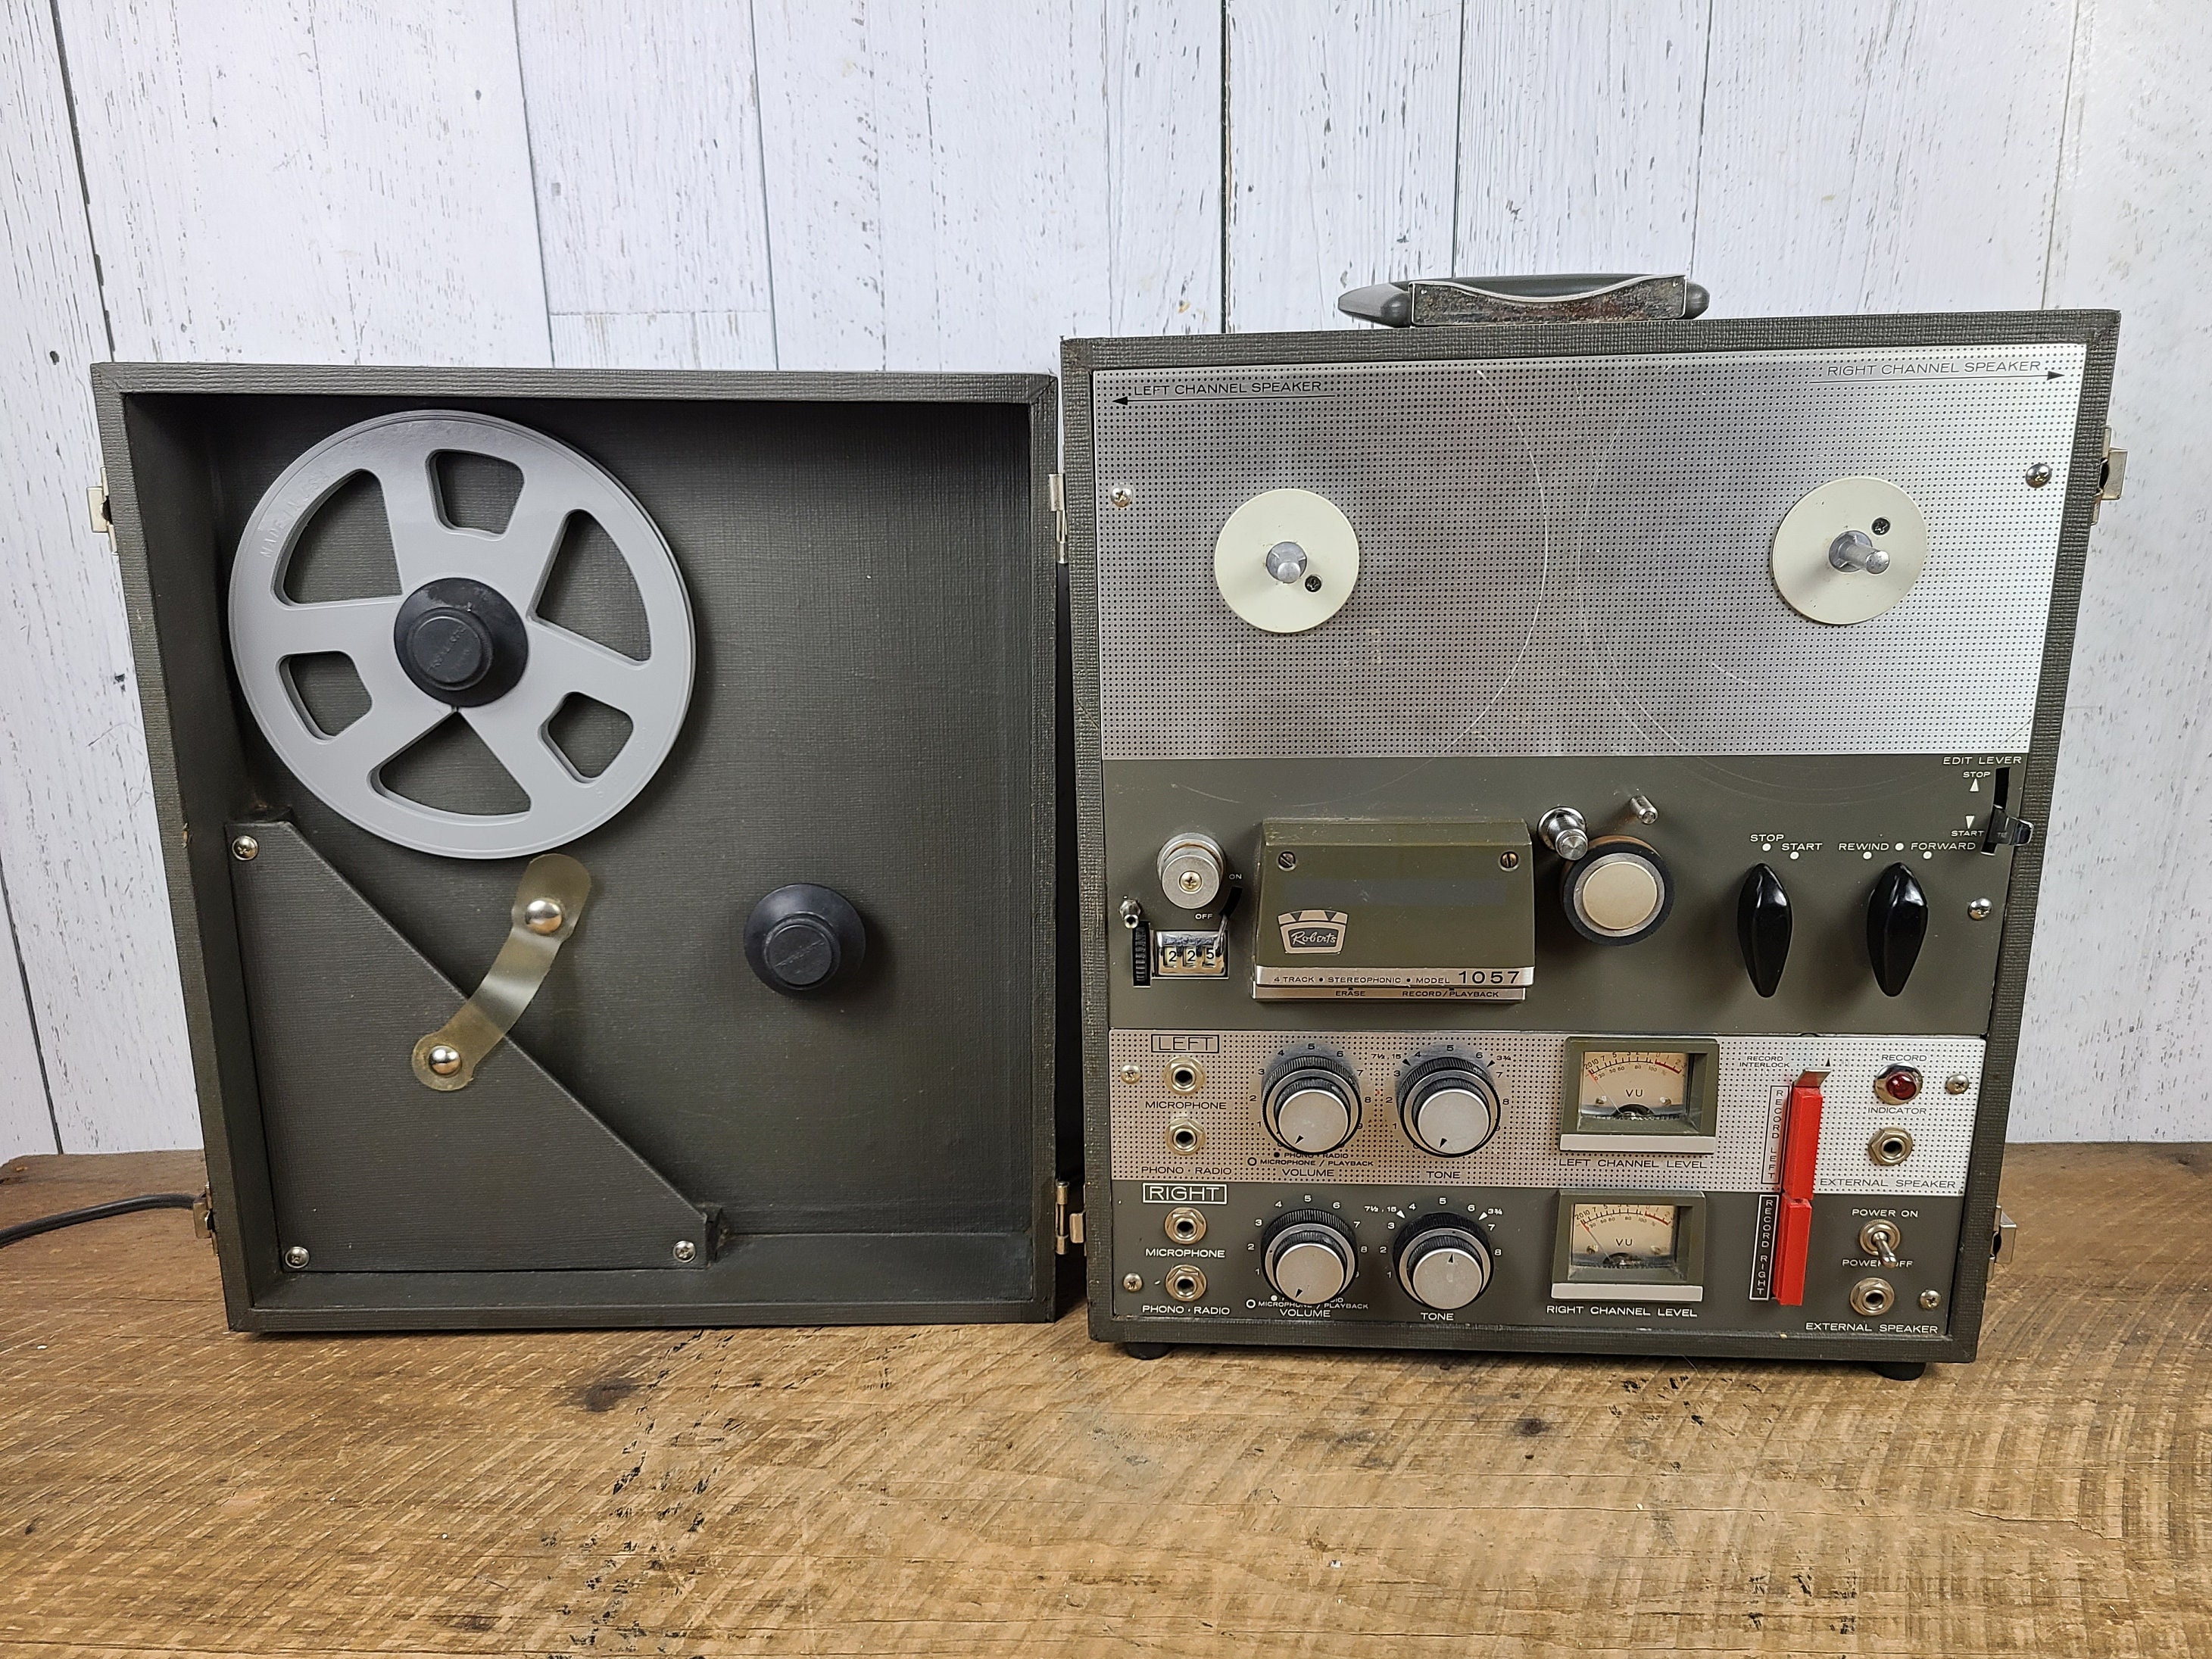 Vintage 1963 Roberts Tape Recorder Model 1057 Works! Tested! 4 Track Stereo  Reel to Reel Audio USA Retro Portable Music System Mid Century